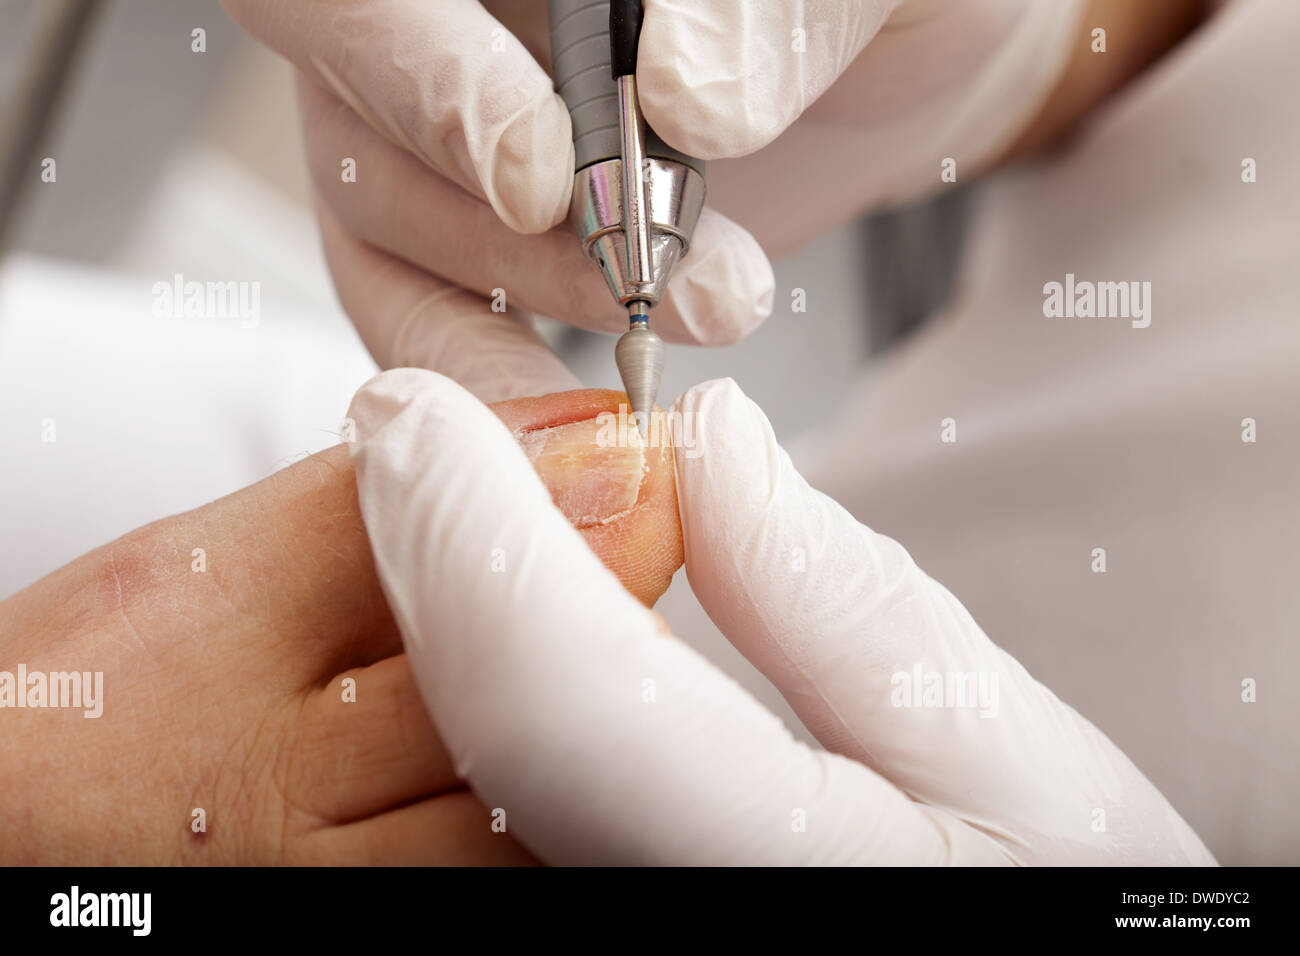 Chiropodist polishing the nails with a special tool Stock Photo